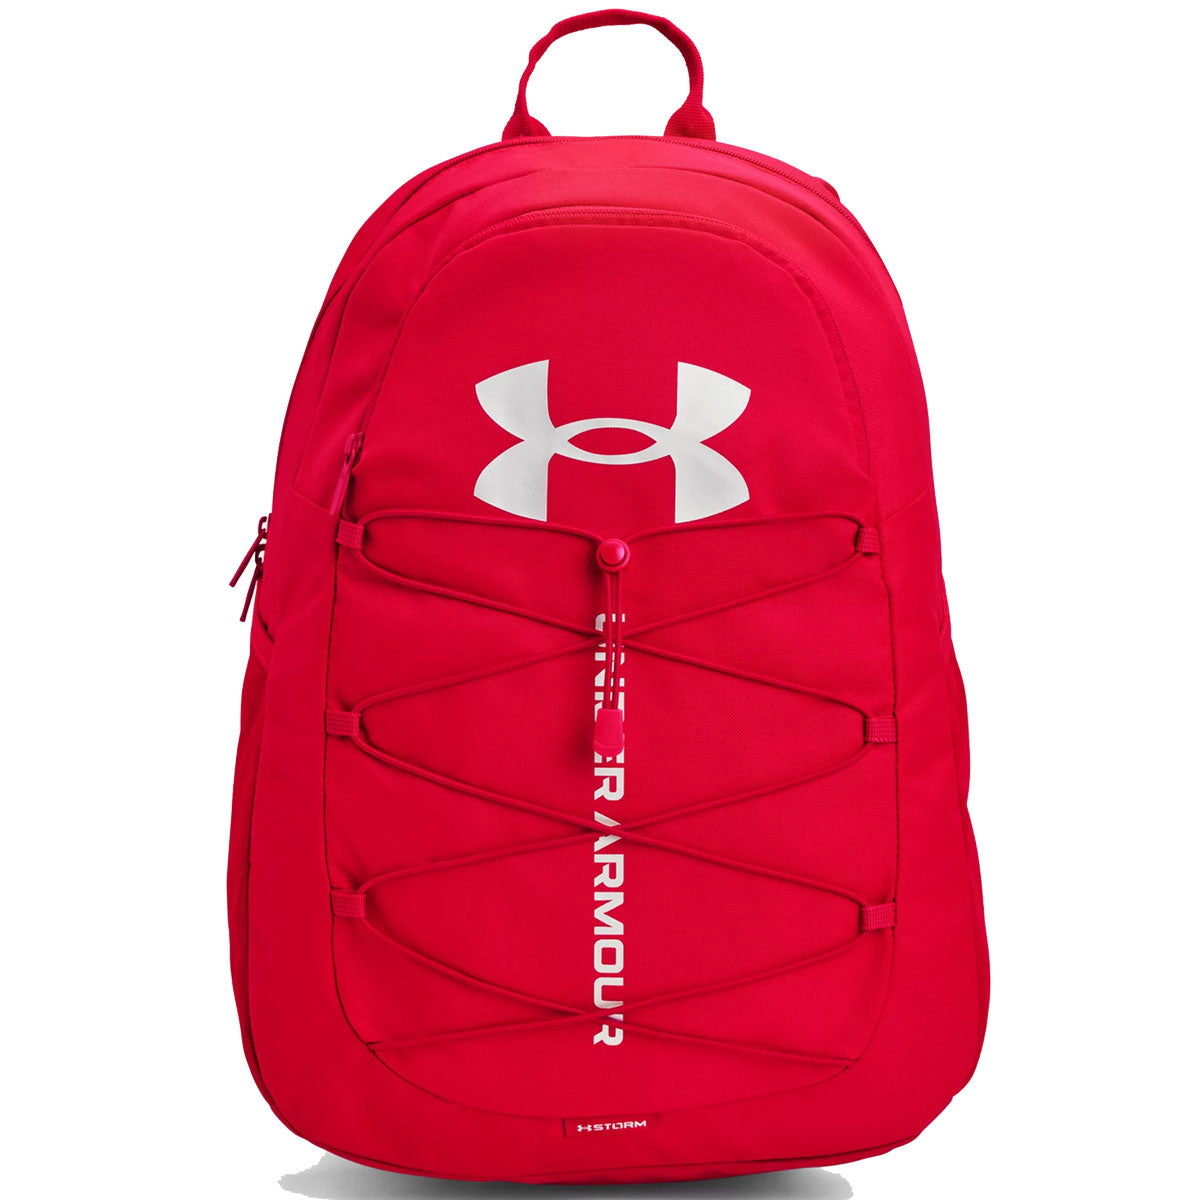 Under Armour Hustle Sport Backpack - Red/Metallic Silver